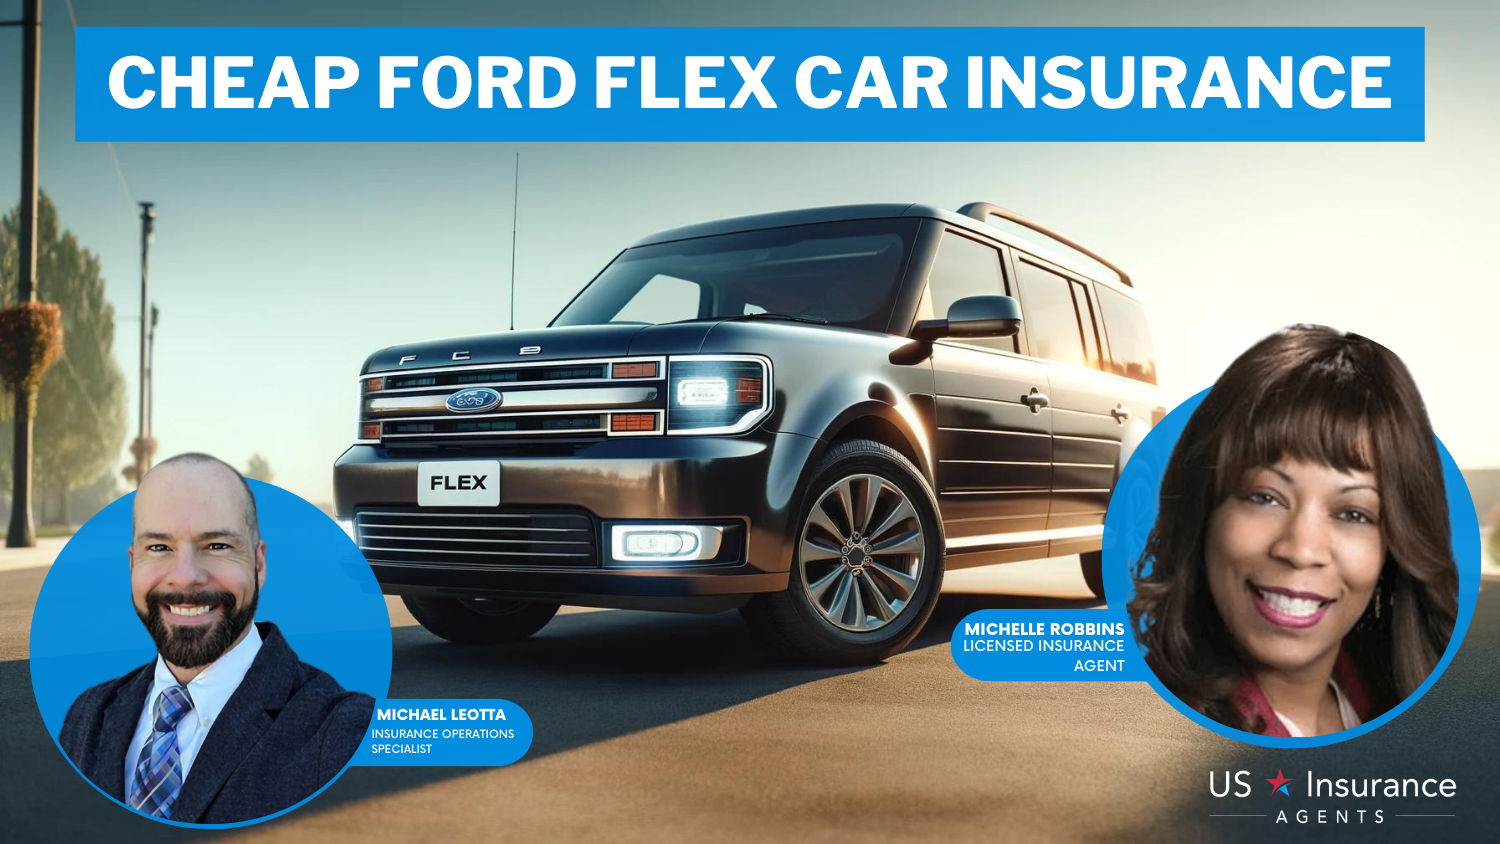 Cheap Ford Flex Car Insurance: State Farm, Nationwide, and USAA